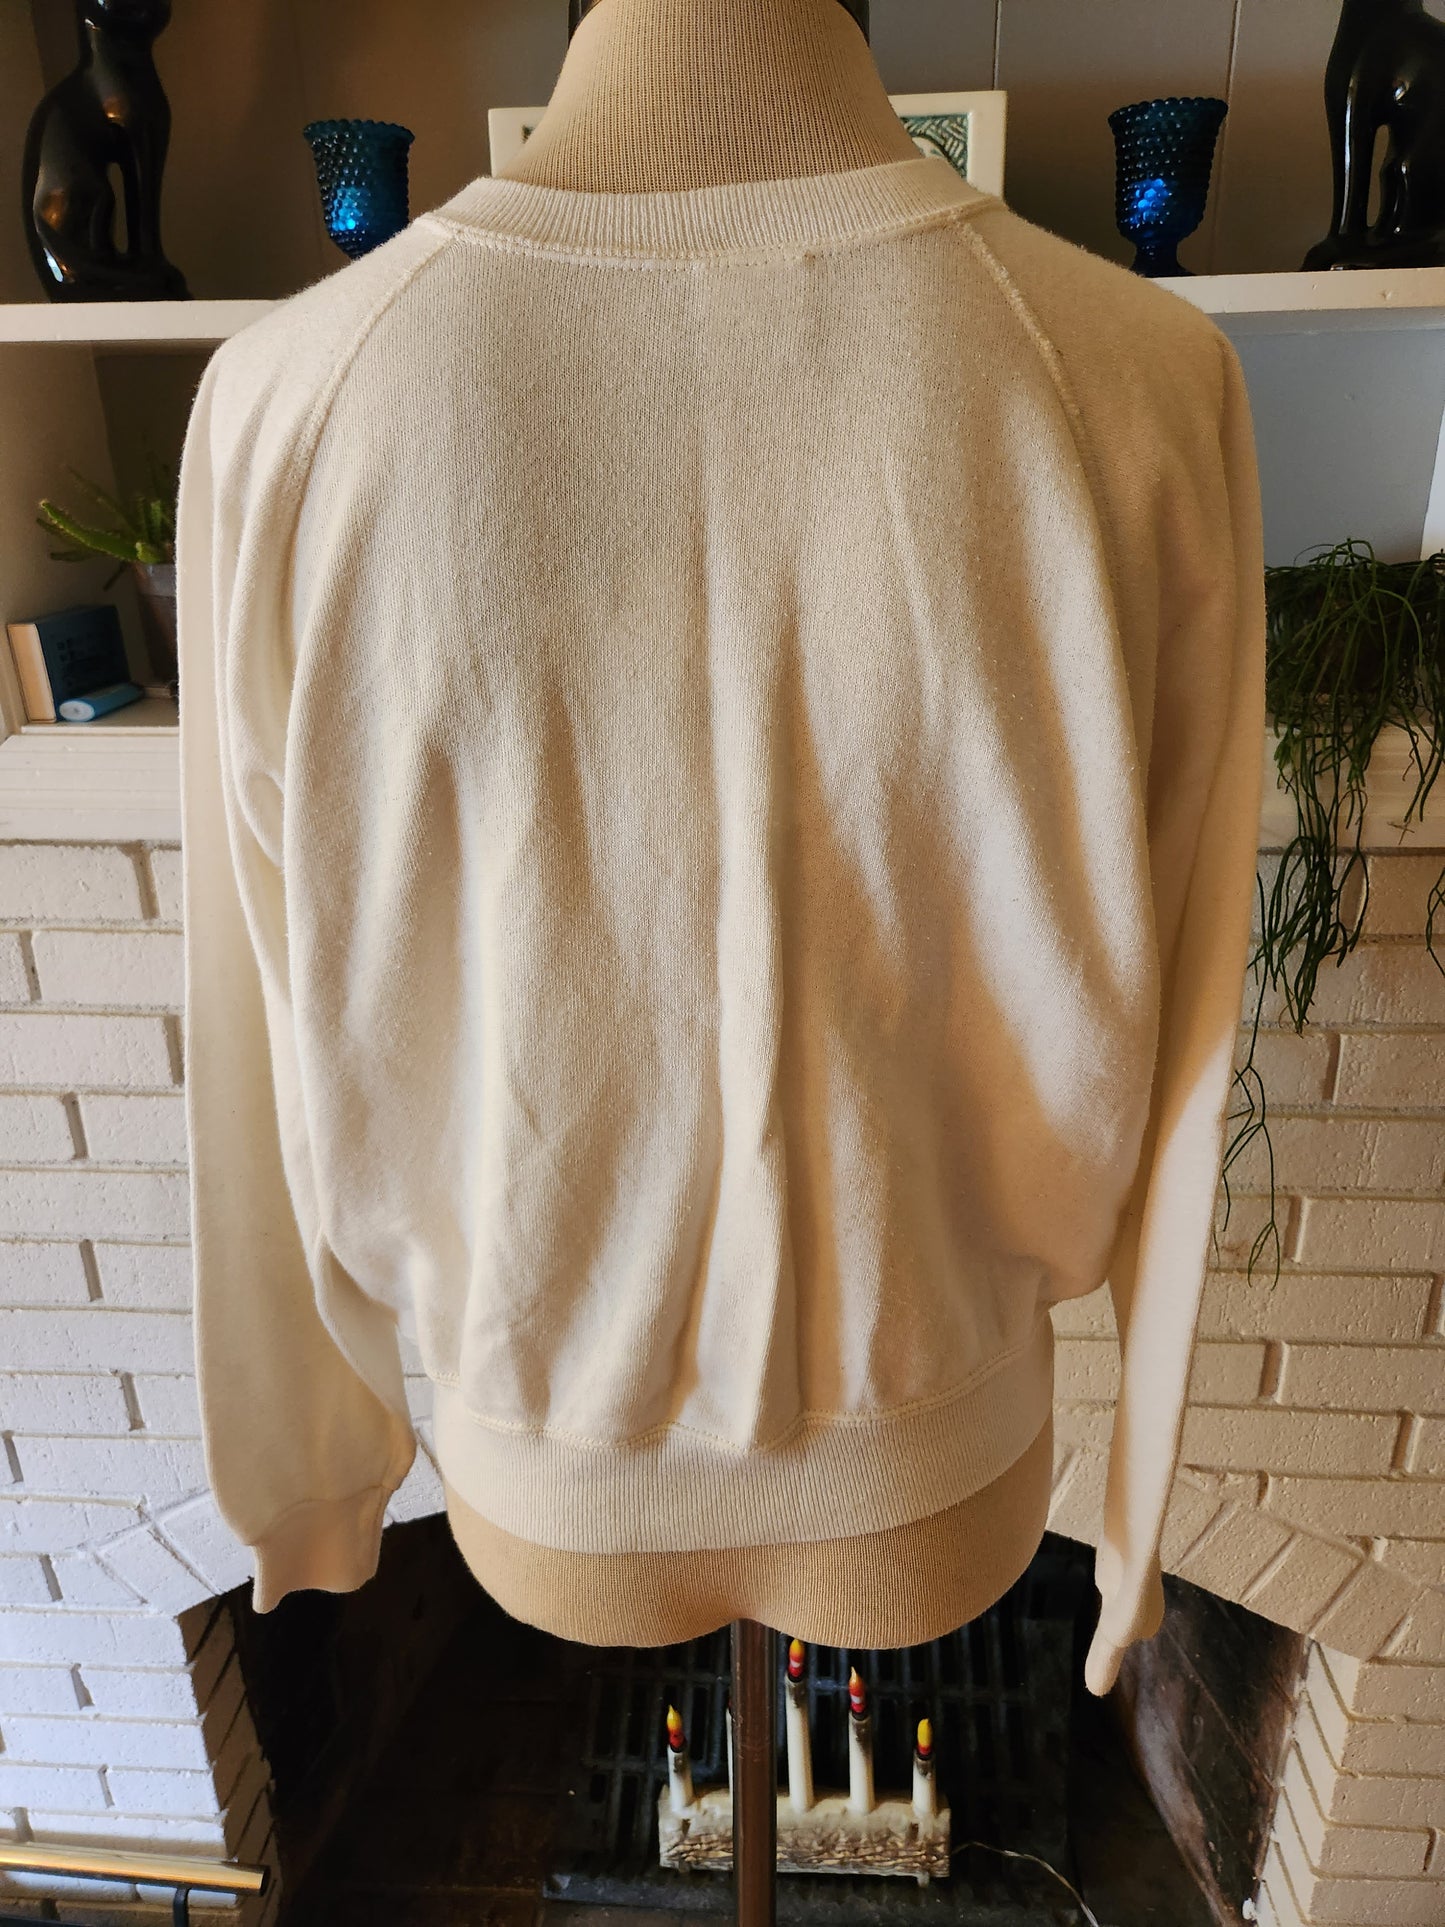 Vintage Somebunny Special Sweatshirt by Gearing Up